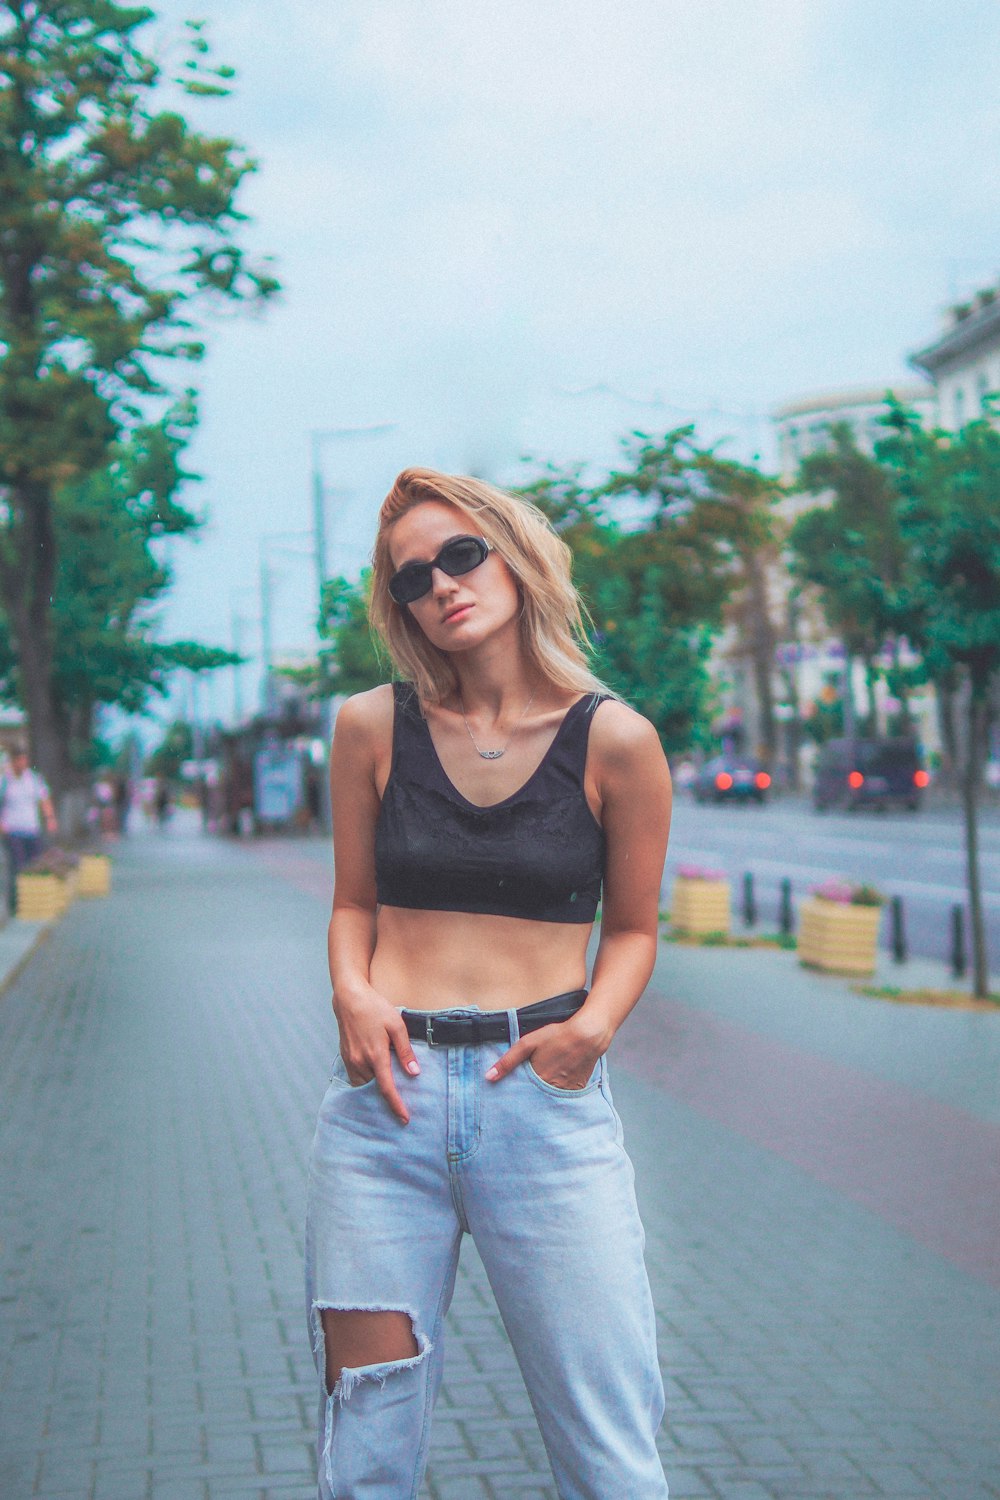 woman in black tank top and blue denim jeans wearing sunglasses standing on road during daytime